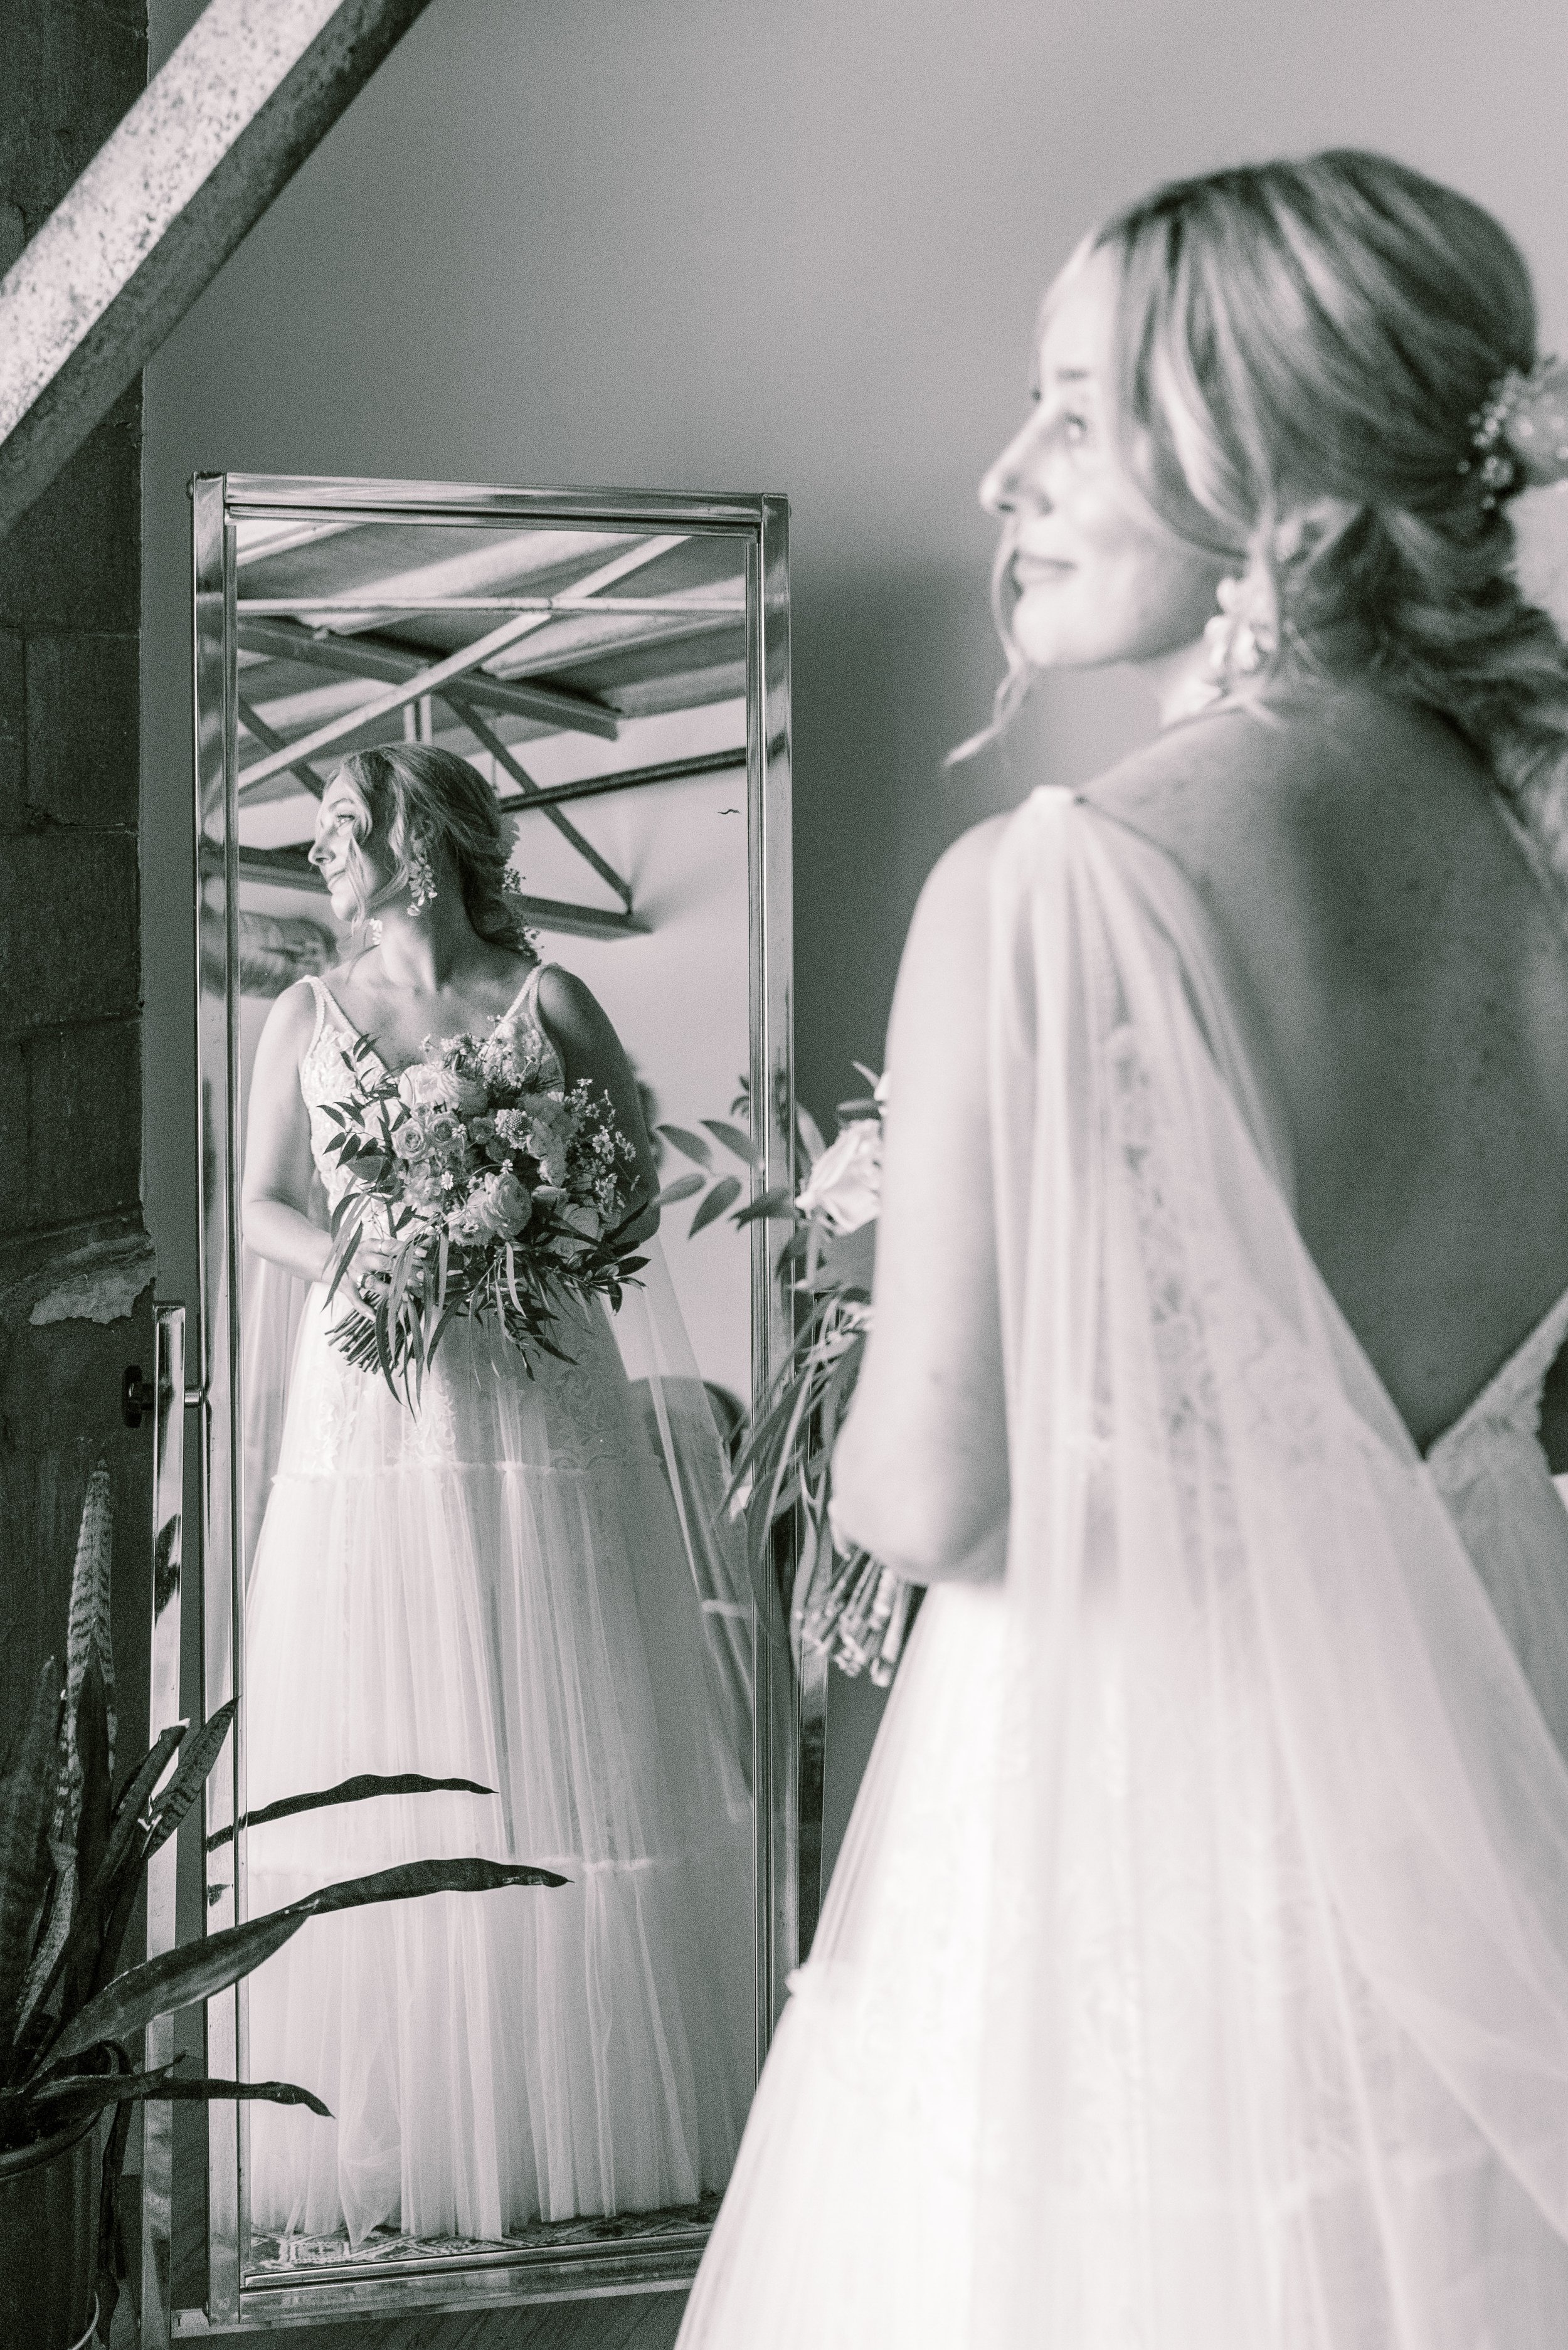  Bride Braid Mirror Reflection Whitaker &amp; Atlantic Wedding in Raleigh, NC Fancy This Photography